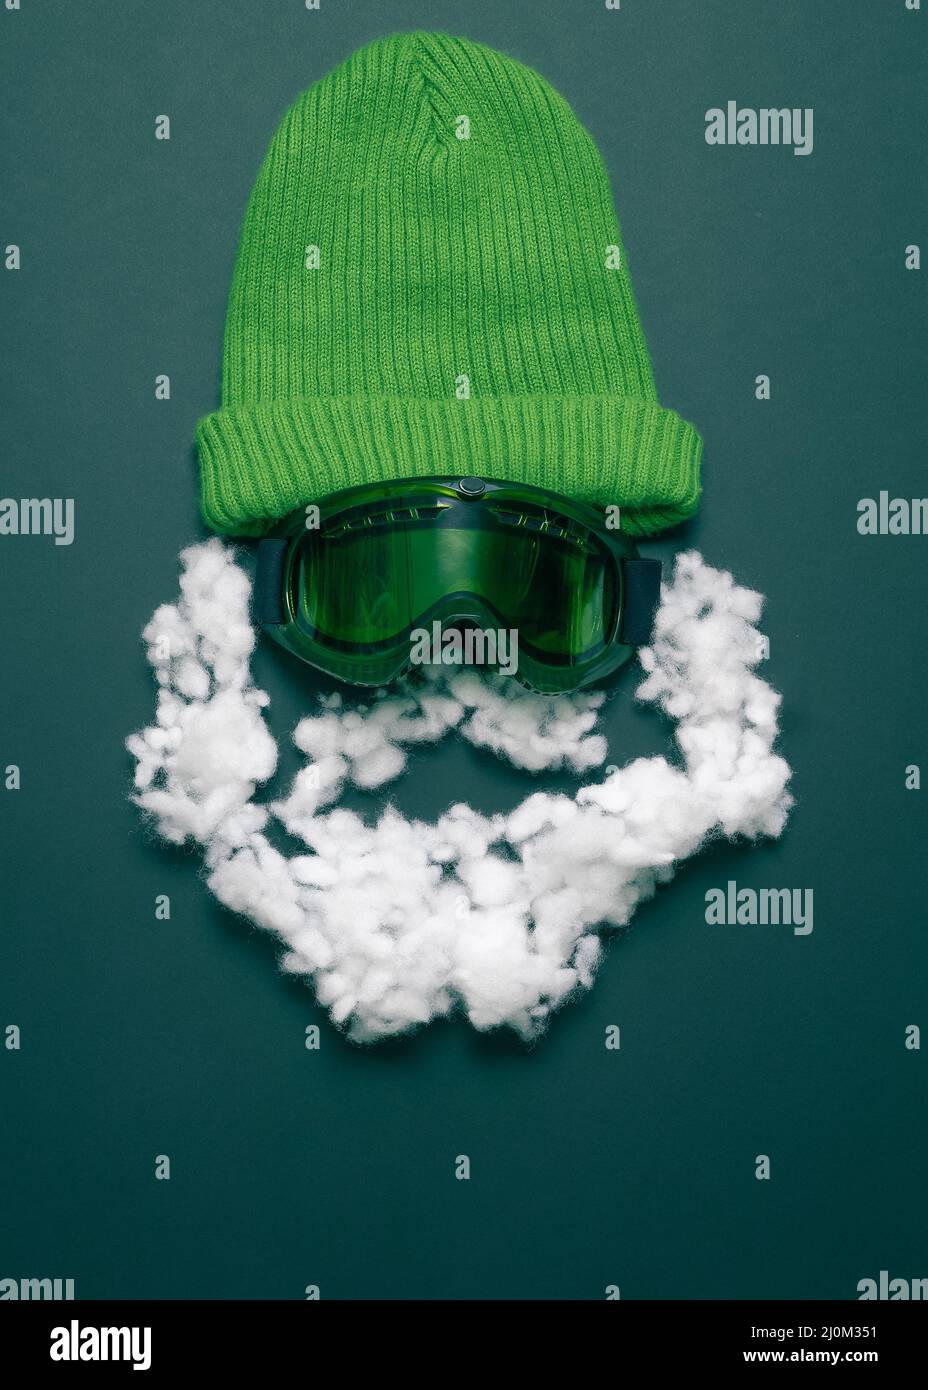 Flatlay composition. The face of a snowboarder and skier. Winter mountain attributes Stock Photo